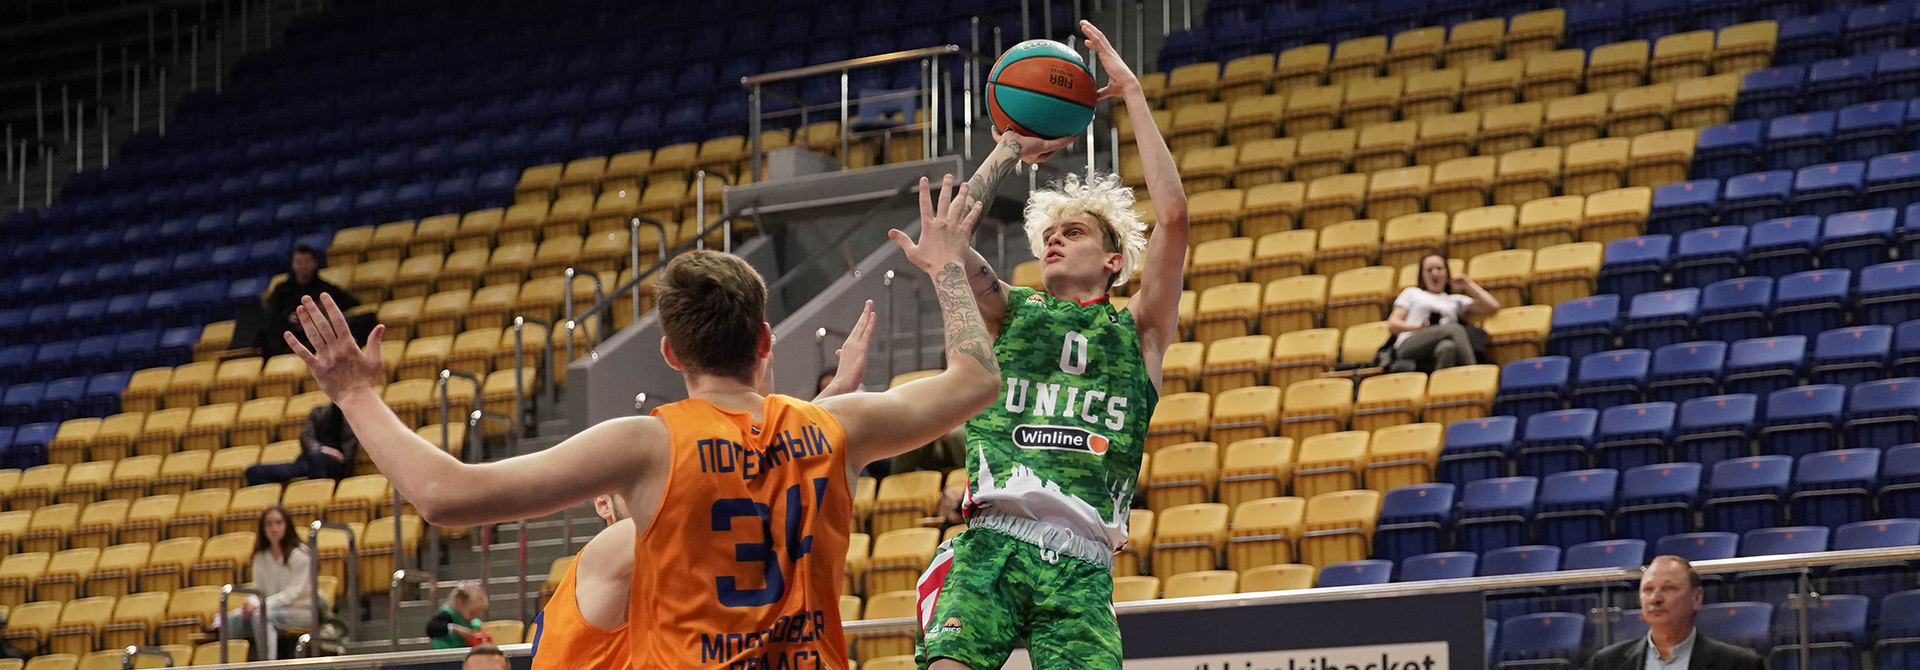 UNICS-2 wins one of the favorites of the season in road game